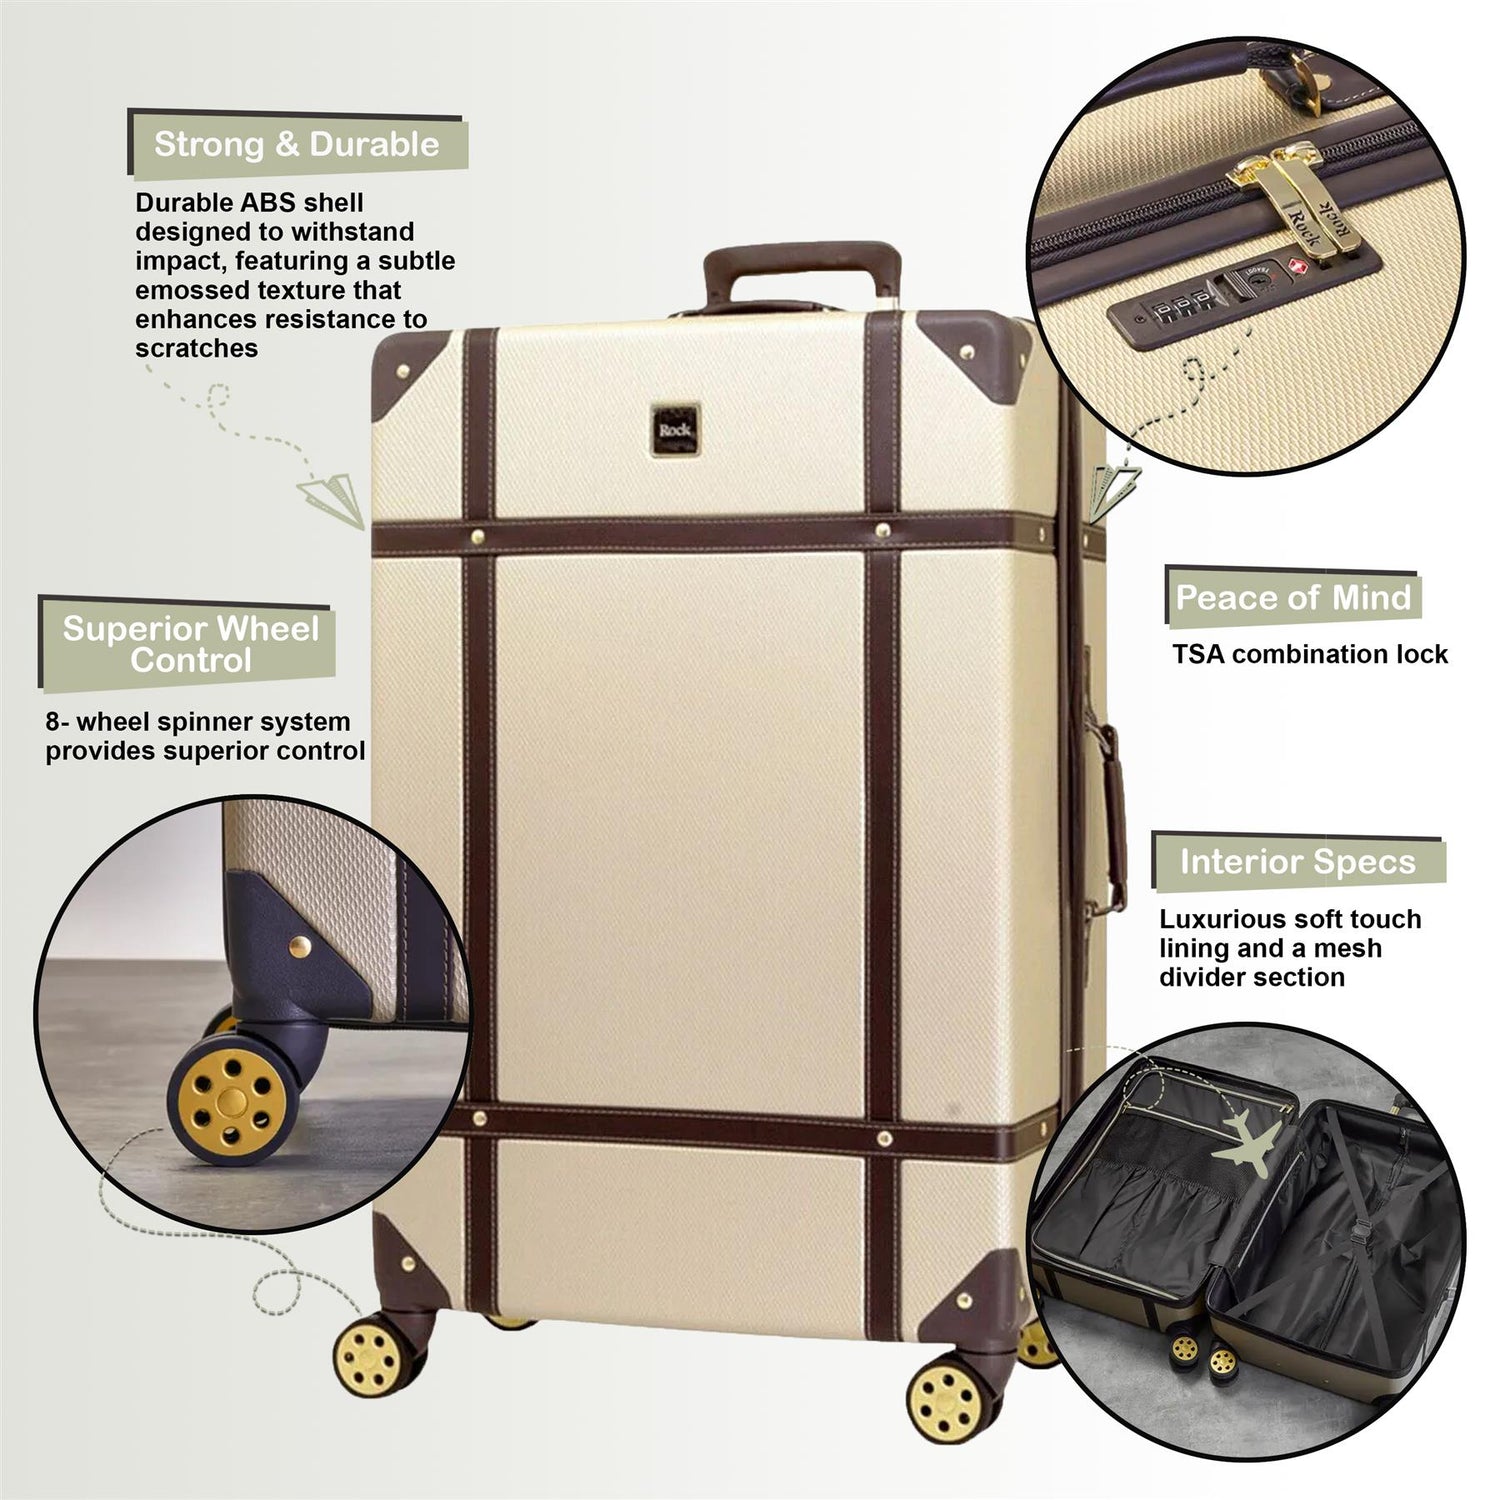 Alexandria Cabin Hard Shell Suitcase in Gold